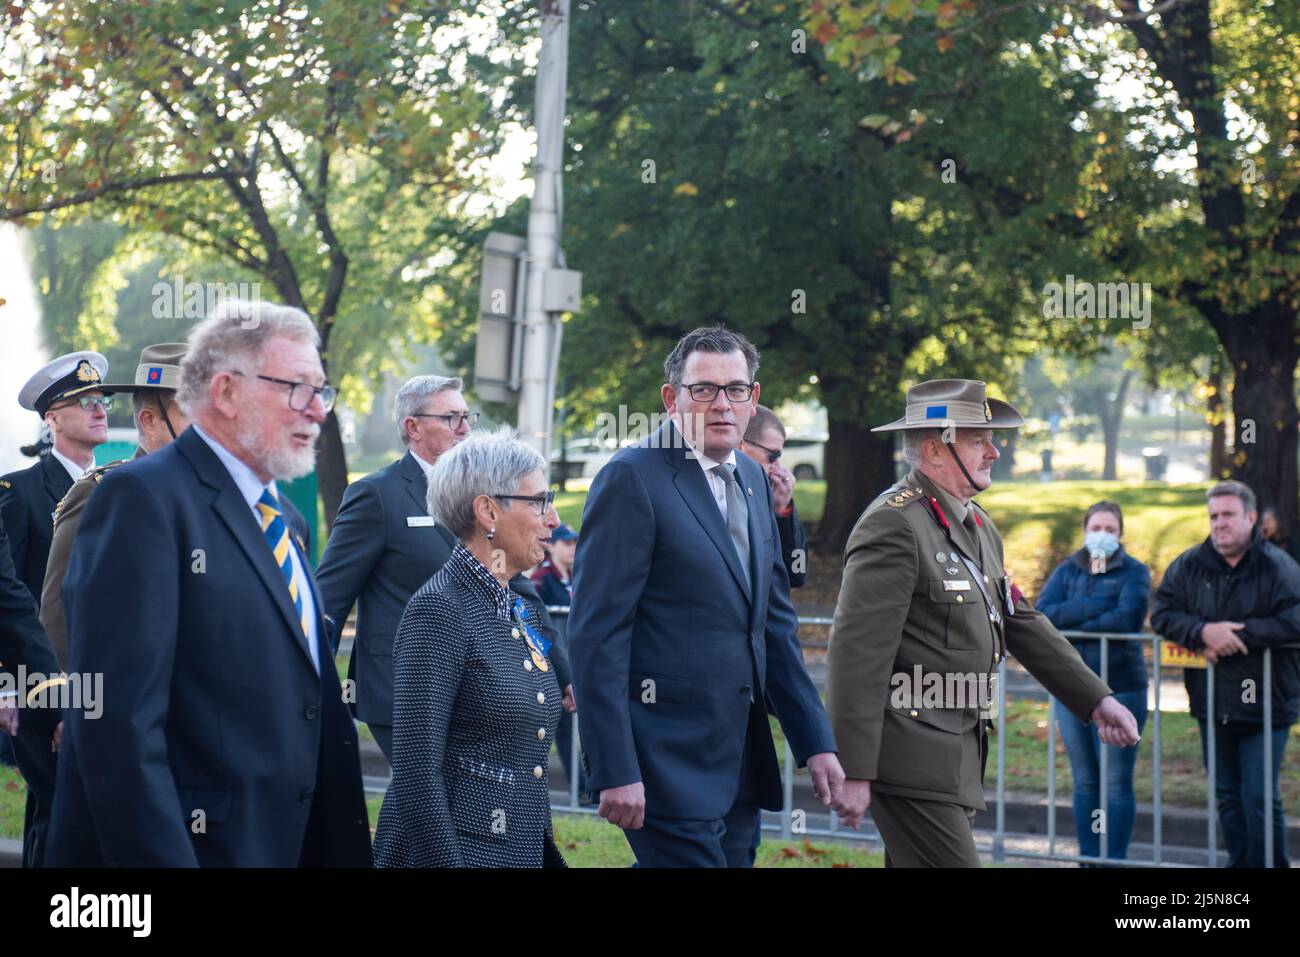 Melbourne, Australia. 25th April 2022.. Victorian Premier Daniel Andrews marches with the Governor of Victoria Linda Dessau as part of the Anzac Day Parade. Credit: Jay Kogler/Alamy Live News Stock Photo